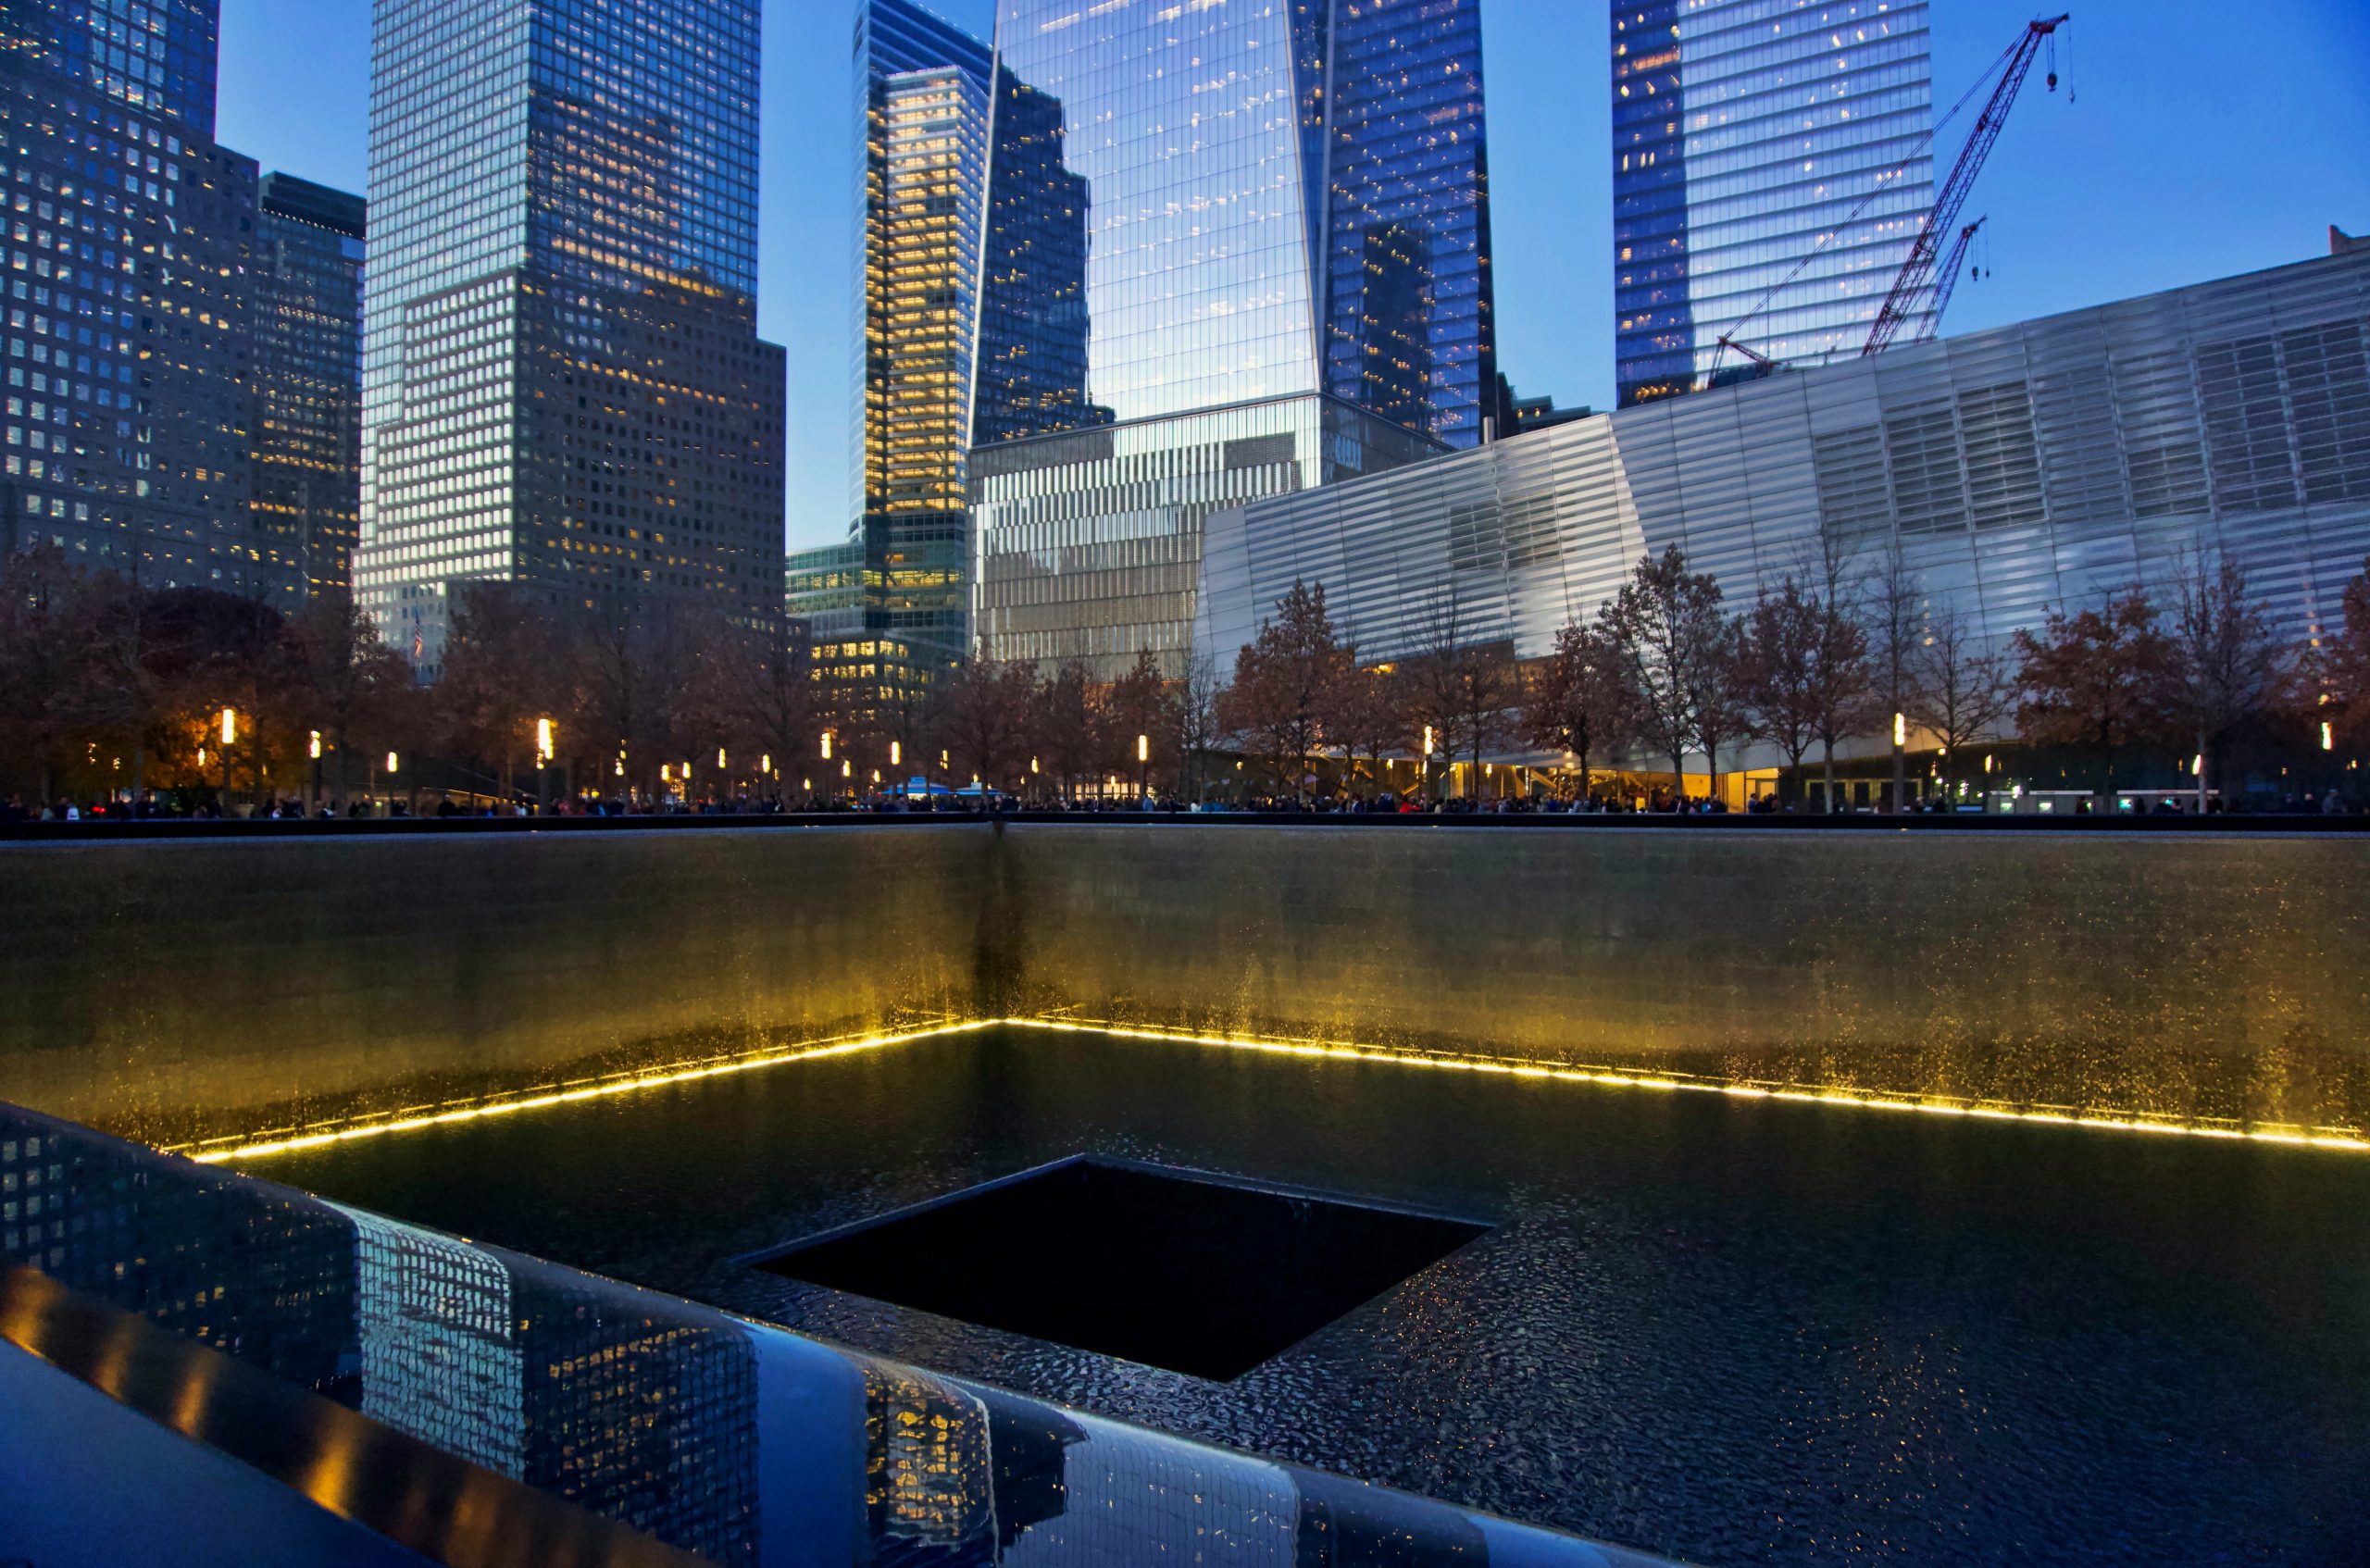 Reflecting fountain pool at the base of South Tower that re-circulates water on the pool's walls.